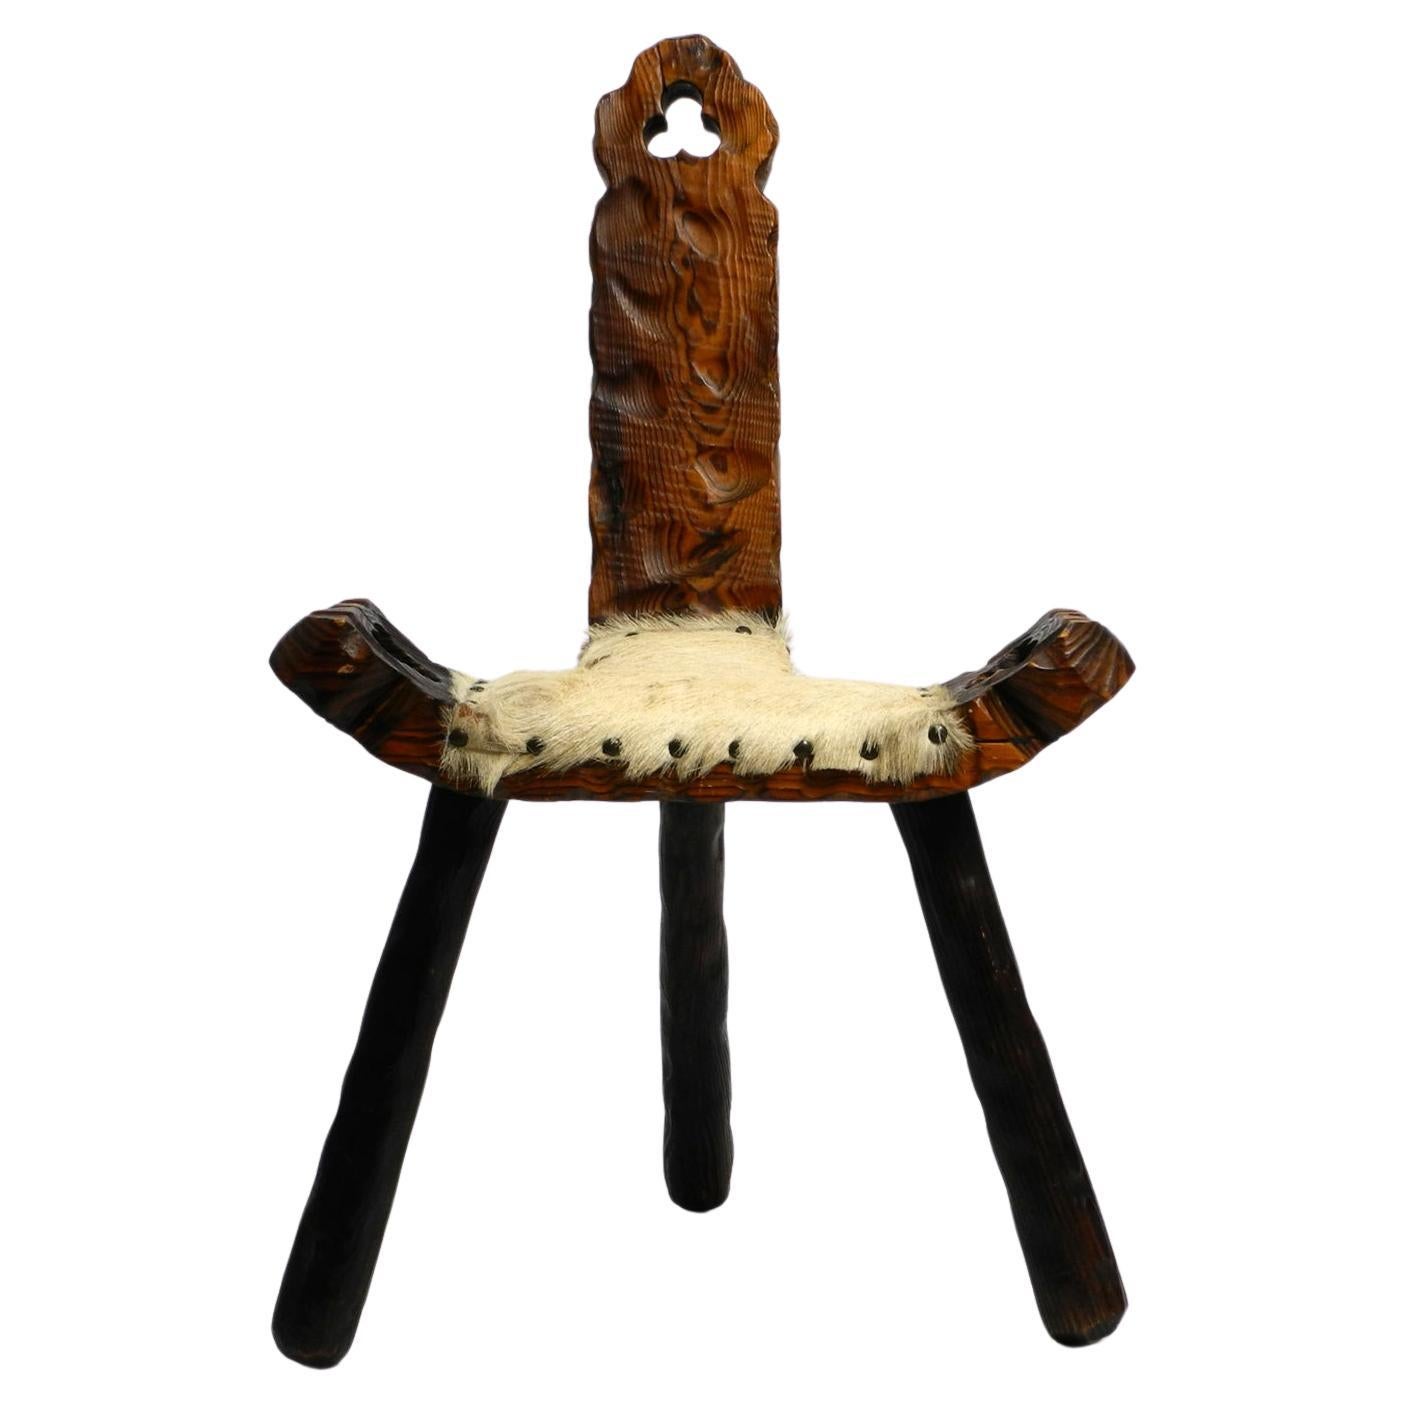 1950s three-legged stool made of solid wood in black-brown with cowhide seat